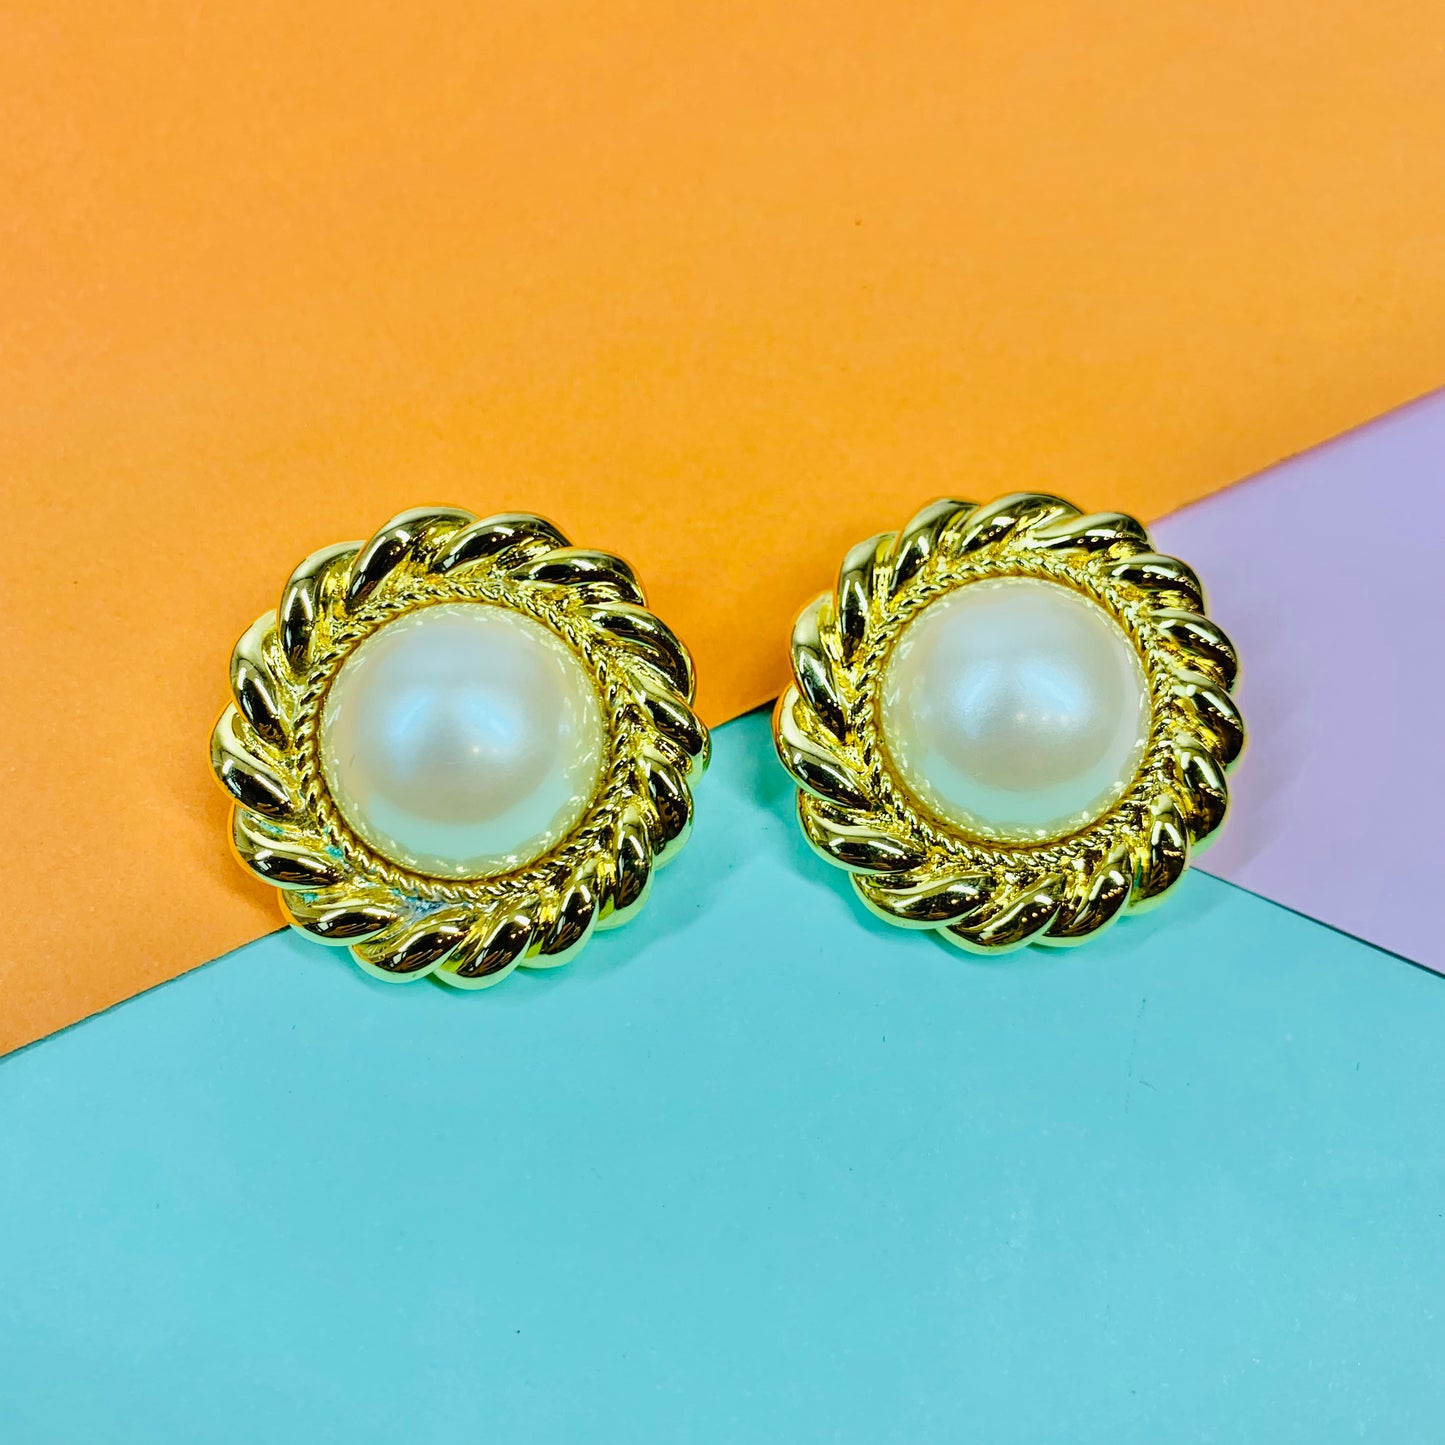 1980s large gold plated clip on filigree pearl button earrings with filigree border